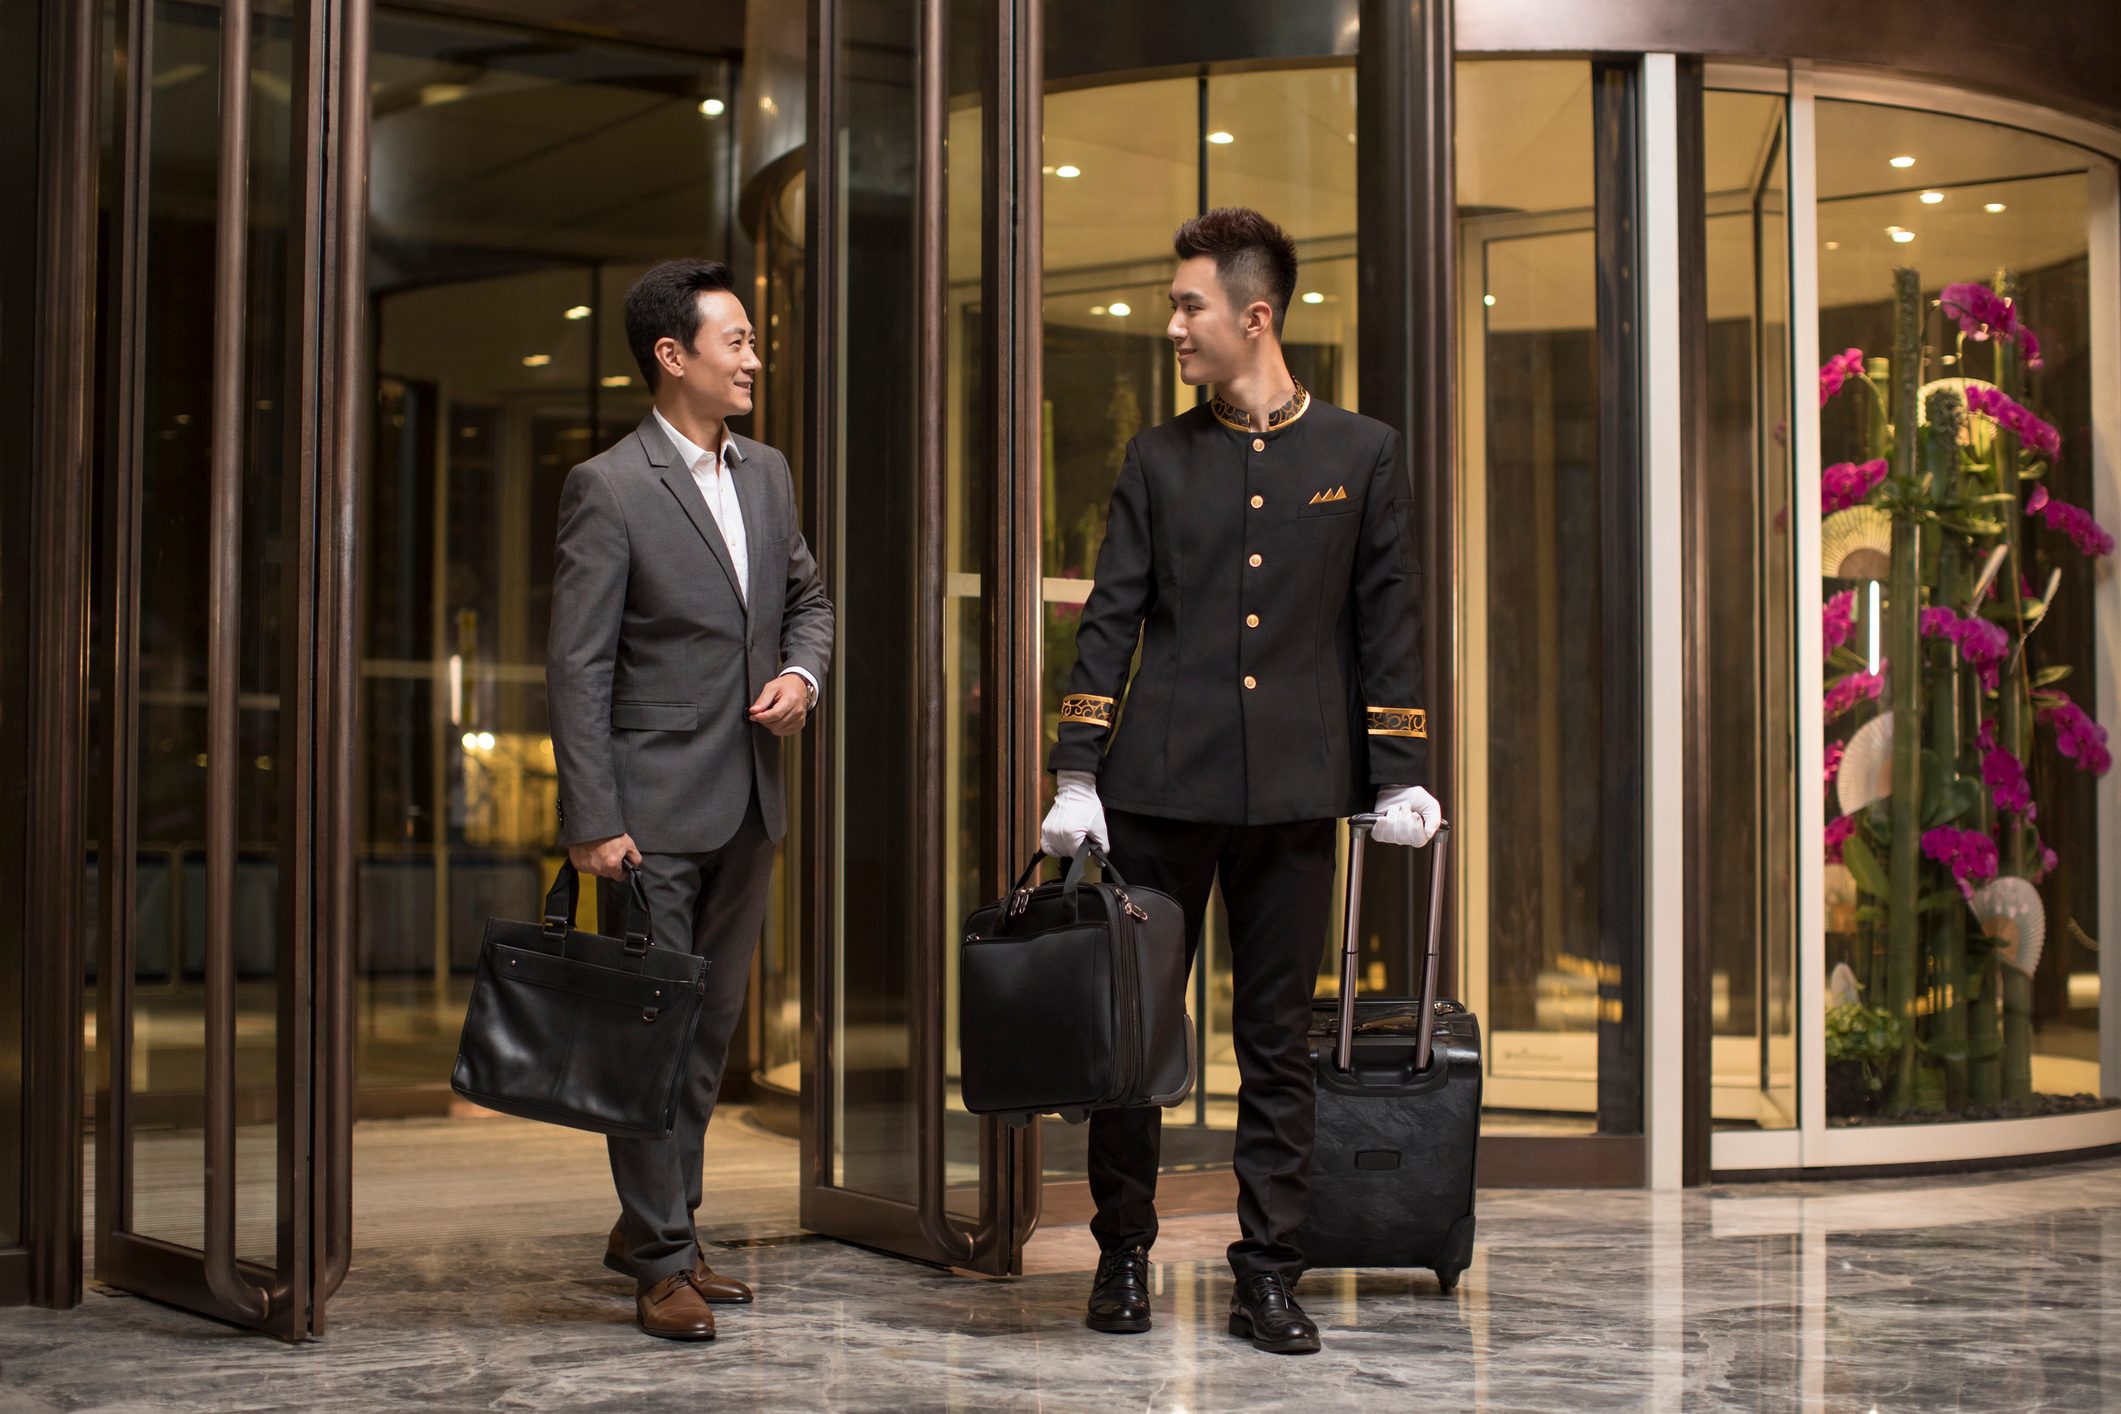 Professional service in luxury hotel